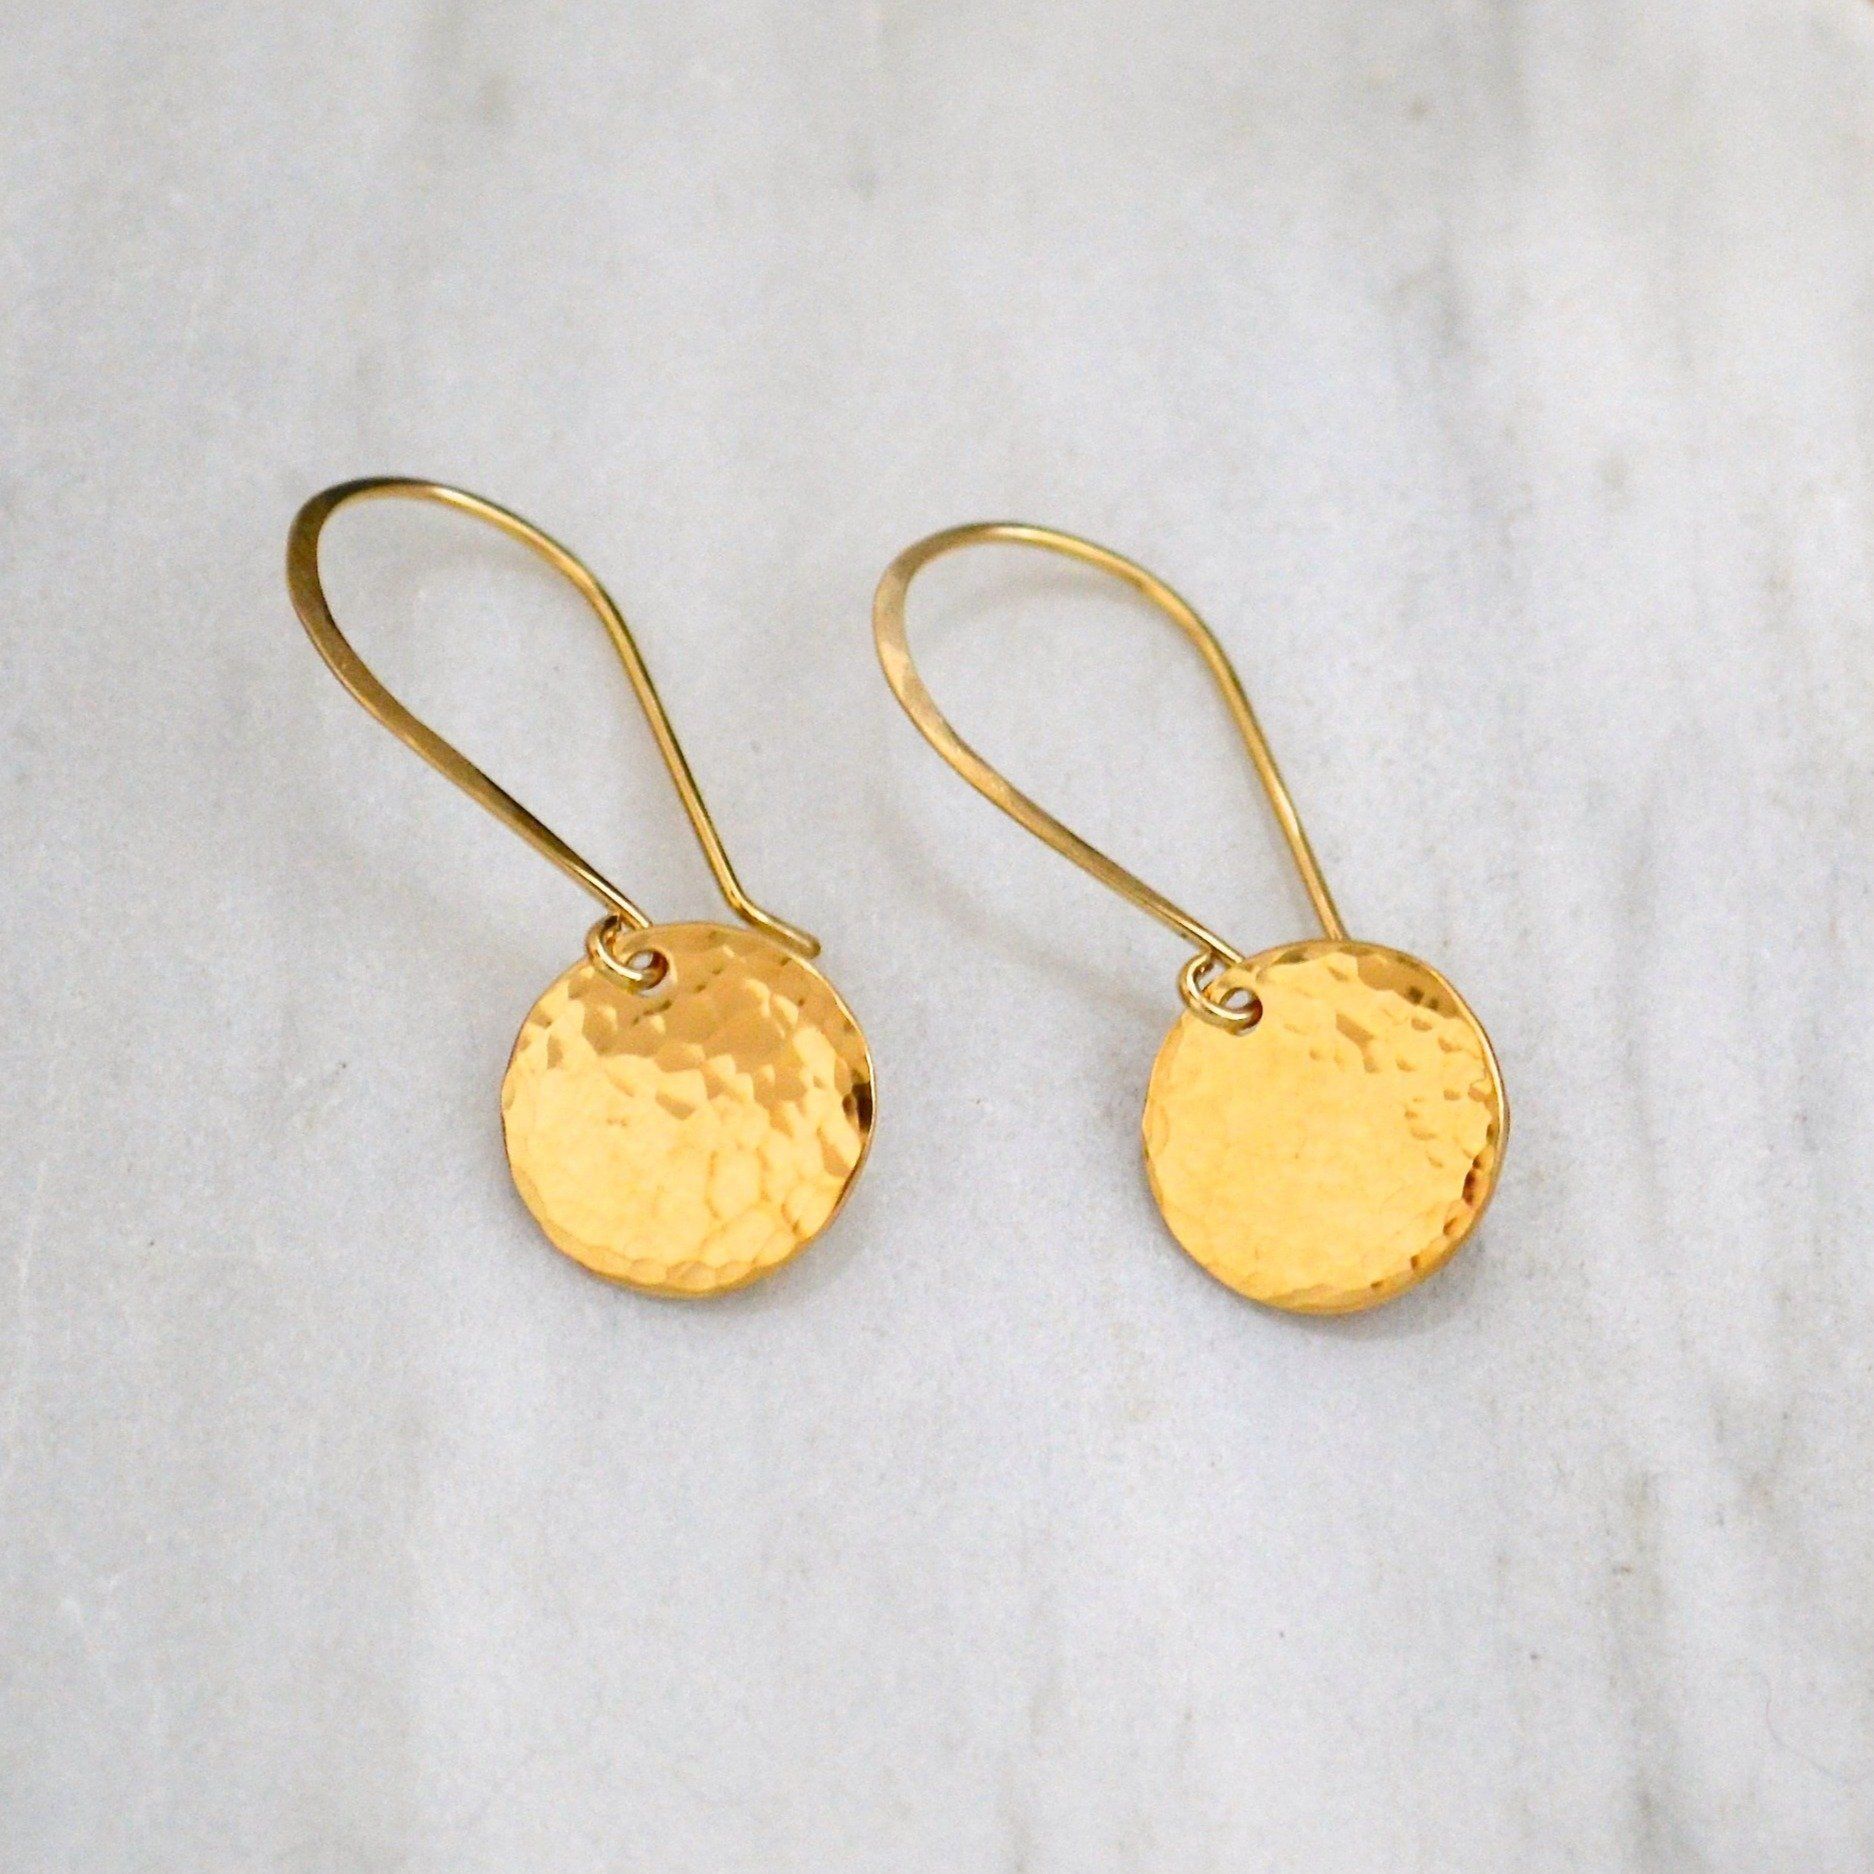 Buy Hammered Gold Disc Stud Earrings, Hammered Stud Earrings, Gold Filled  Minimalist Earrings, Simple Small Gold Earrings, Gold Earrings Online in  India - Etsy